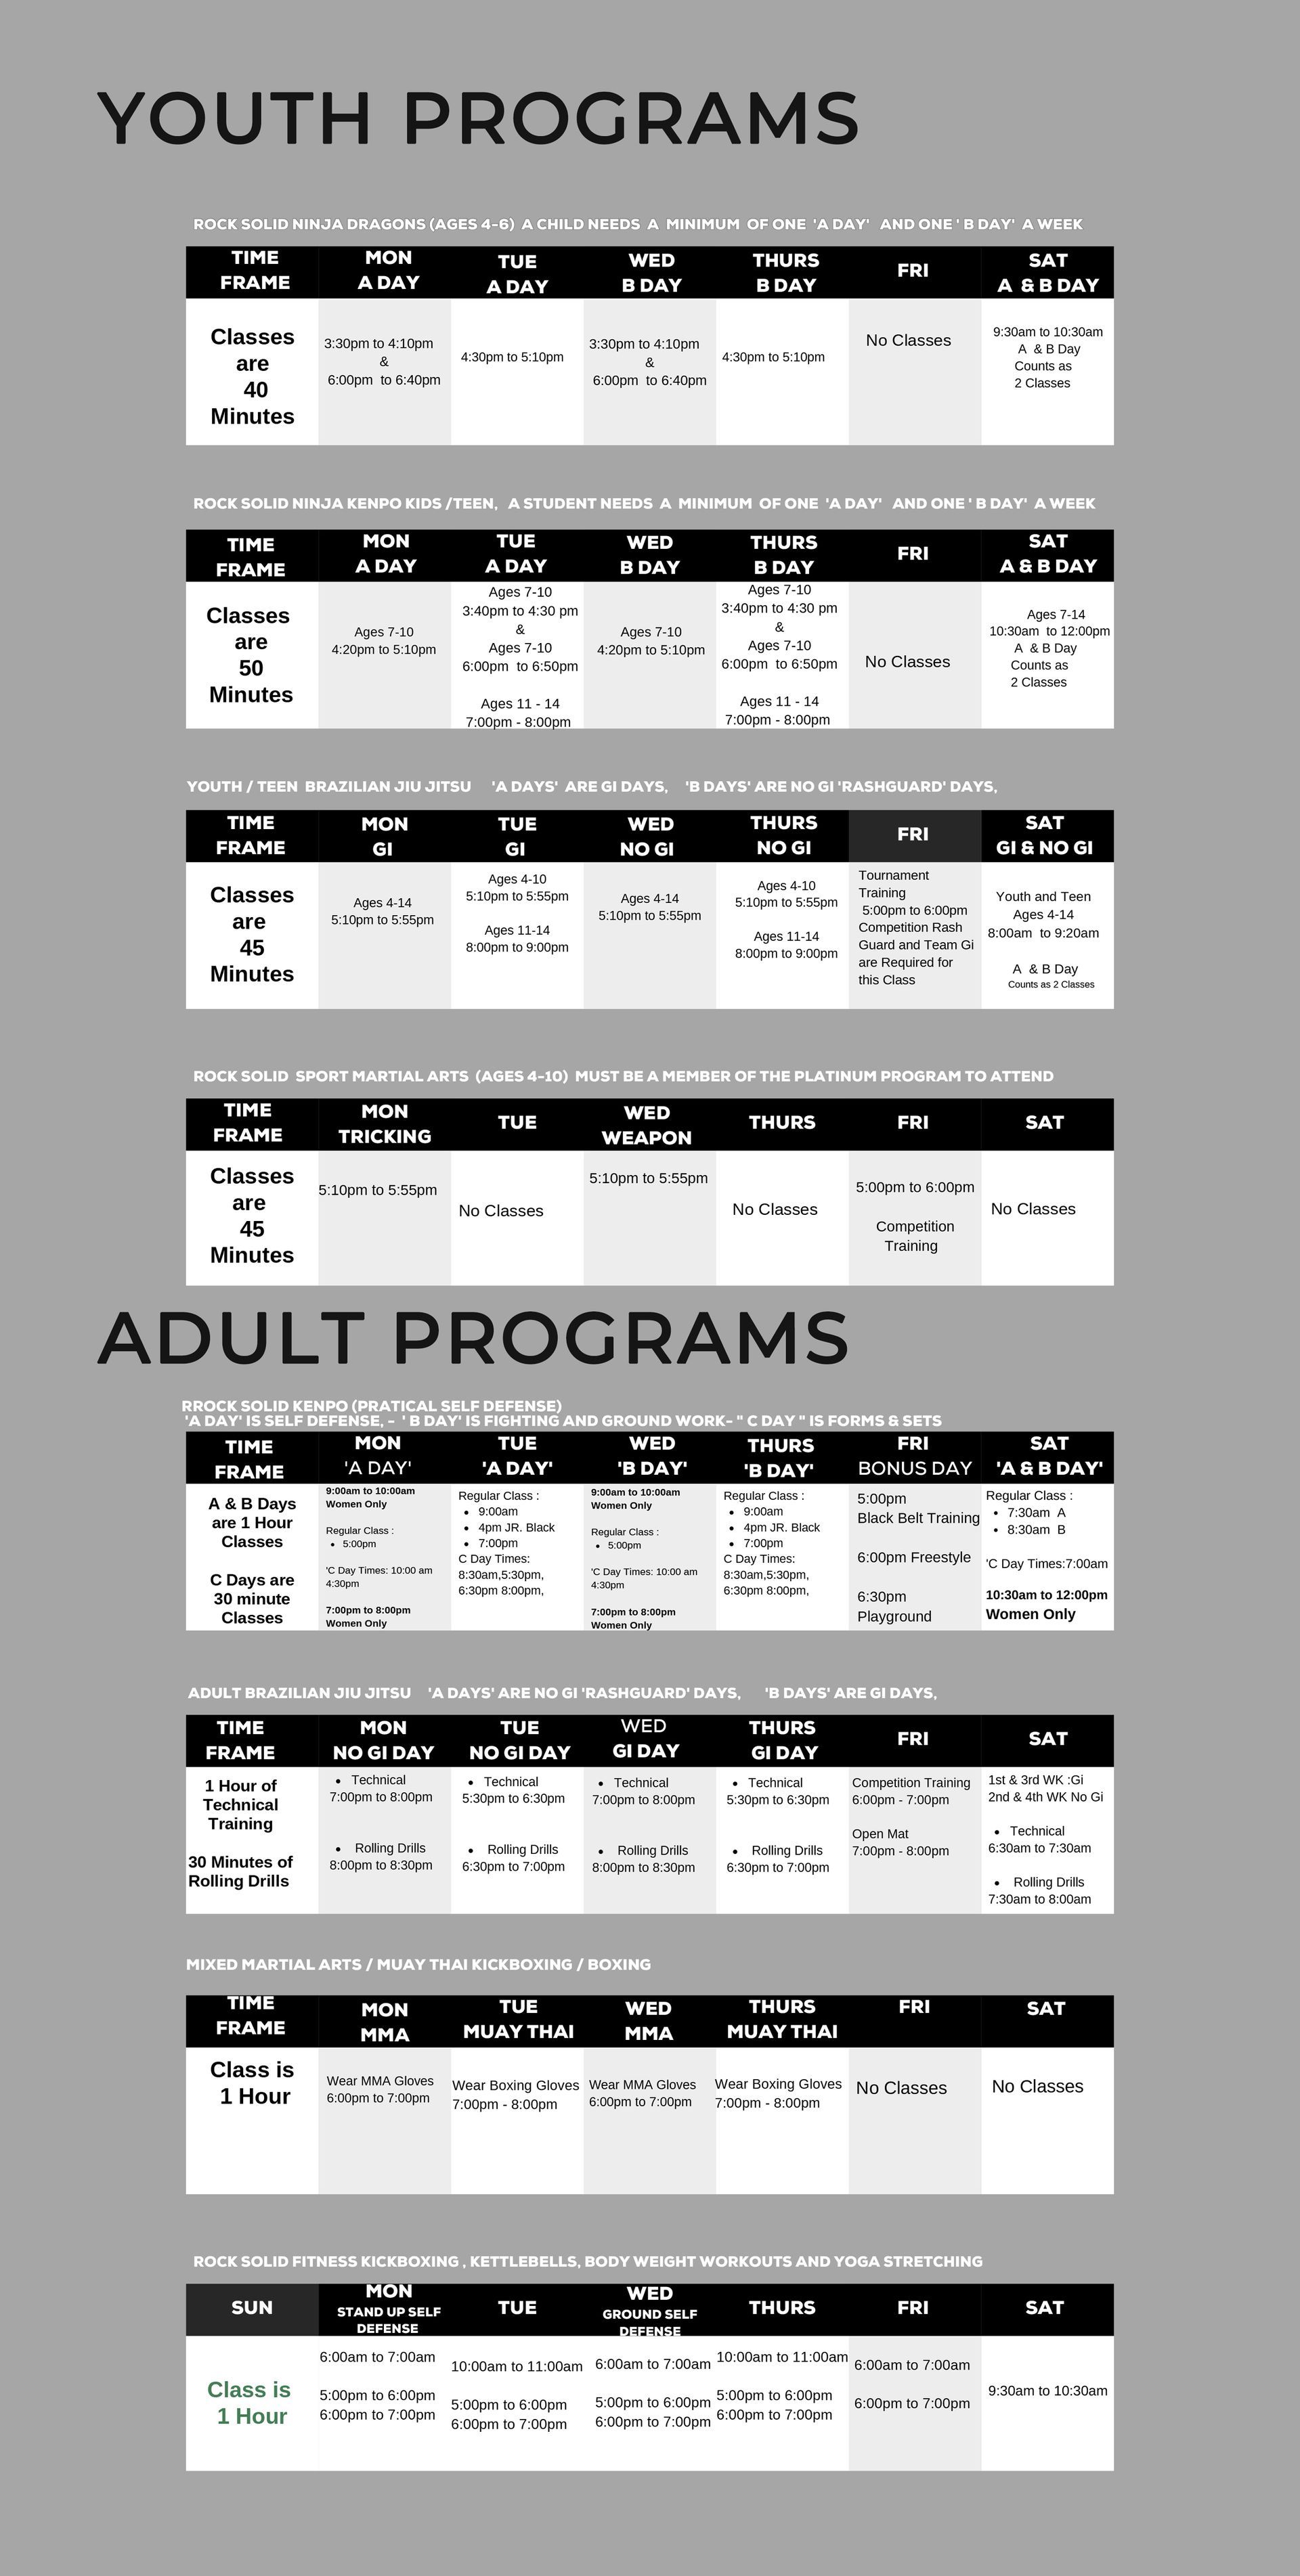 a schedule for youth and adult programs is shown